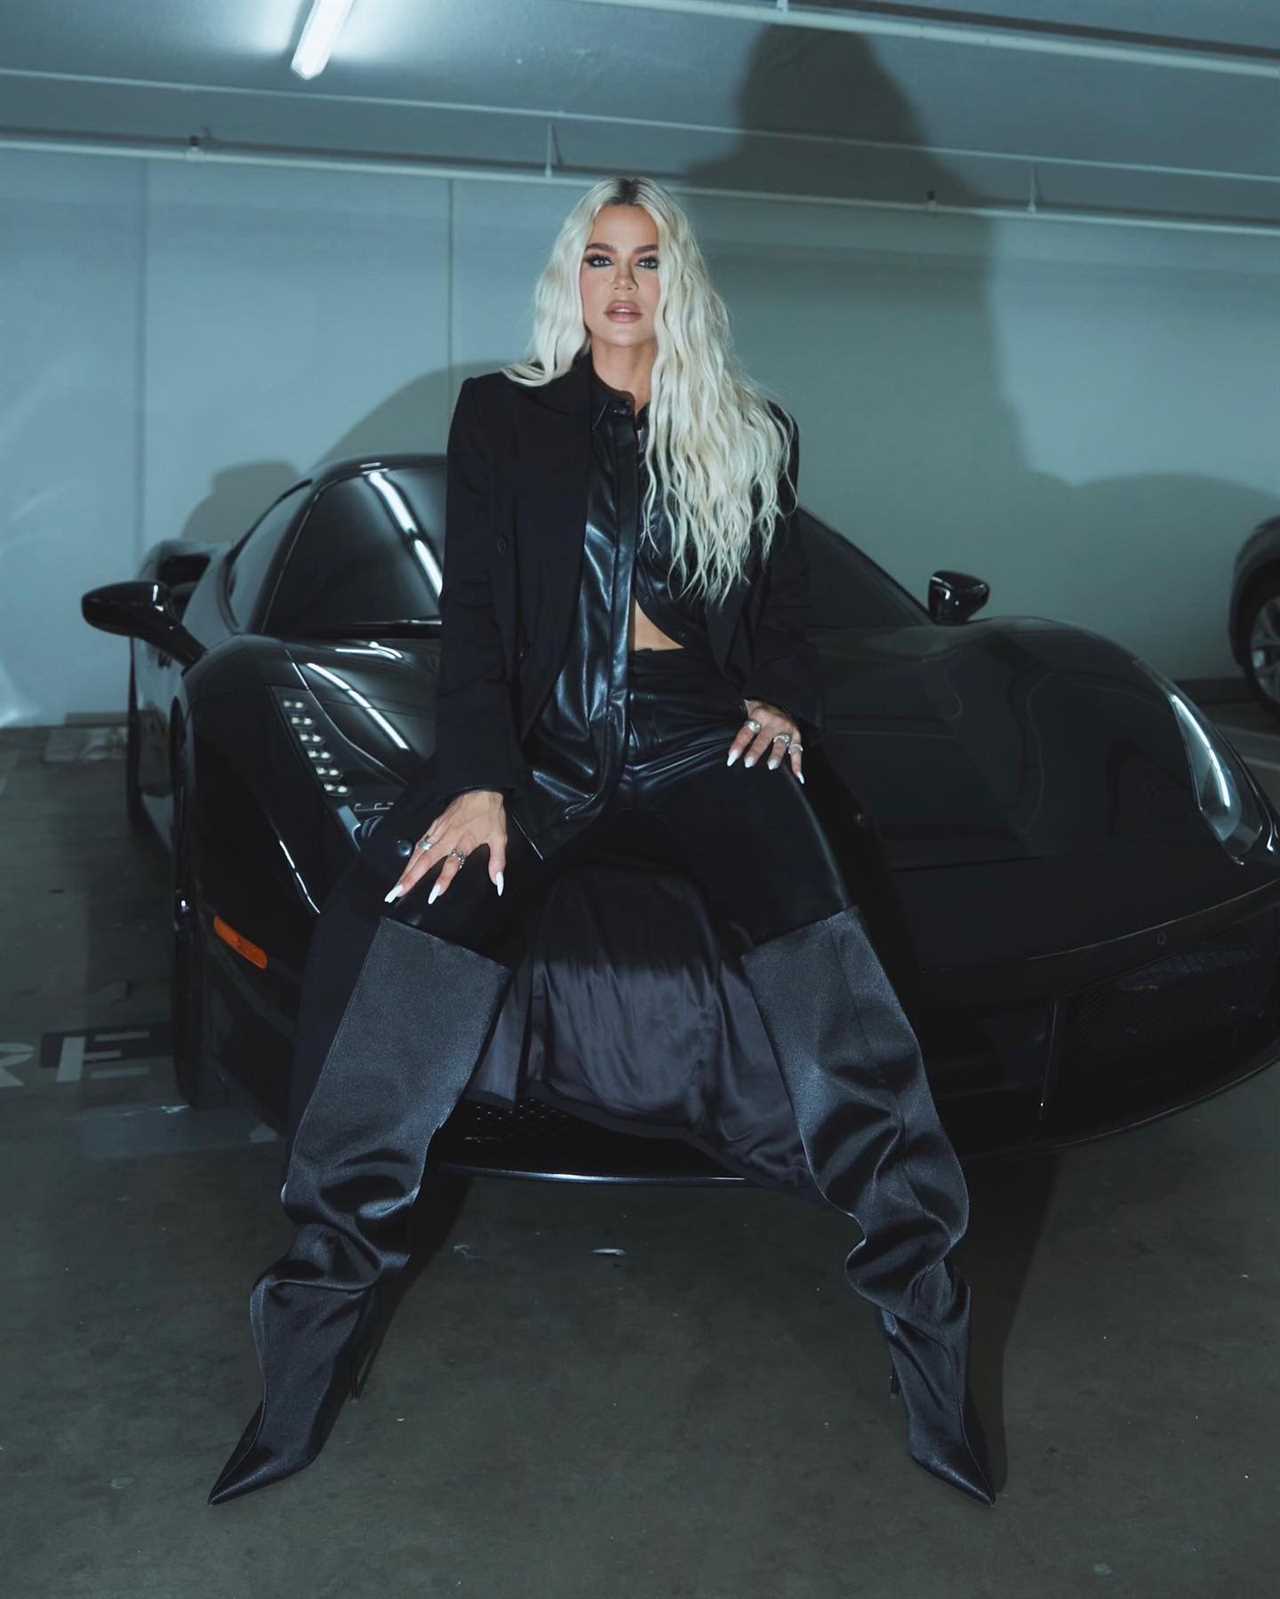 Khloe Kardashian shows off major change to her appearance in sexy new photo as fans say she looks ‘just like Kim’